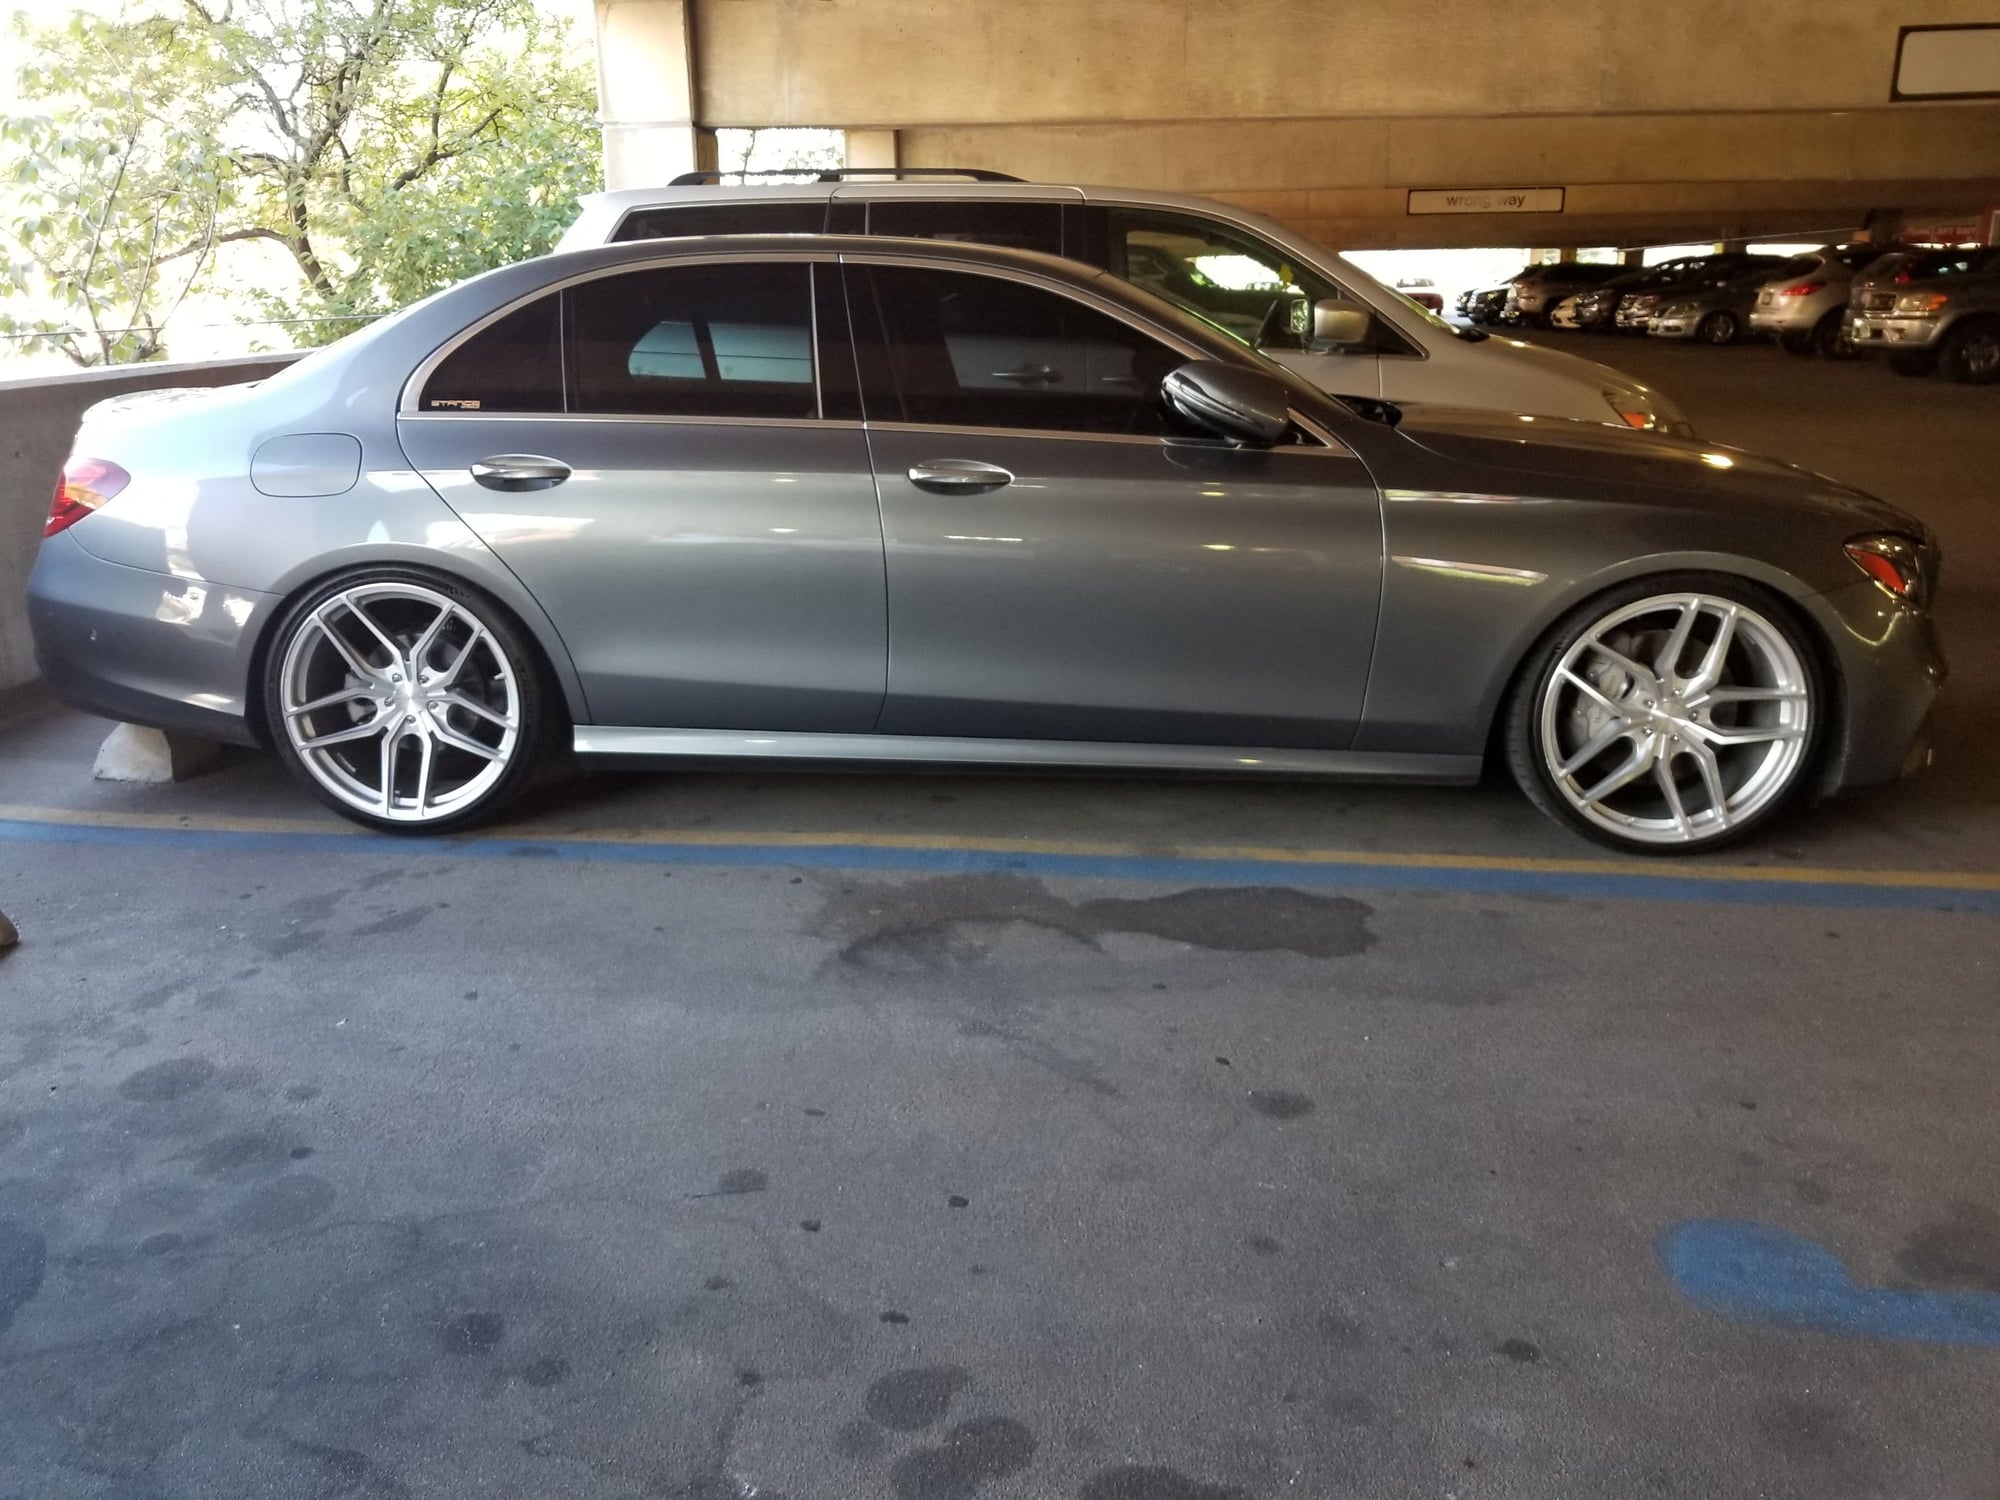 Wheels and Tires/Axles - STANCE SF03 WHEELS and MPSS Tires - Used - 2017 to 2019 Mercedes-Benz E300 - Bronx, NY 10469, United States